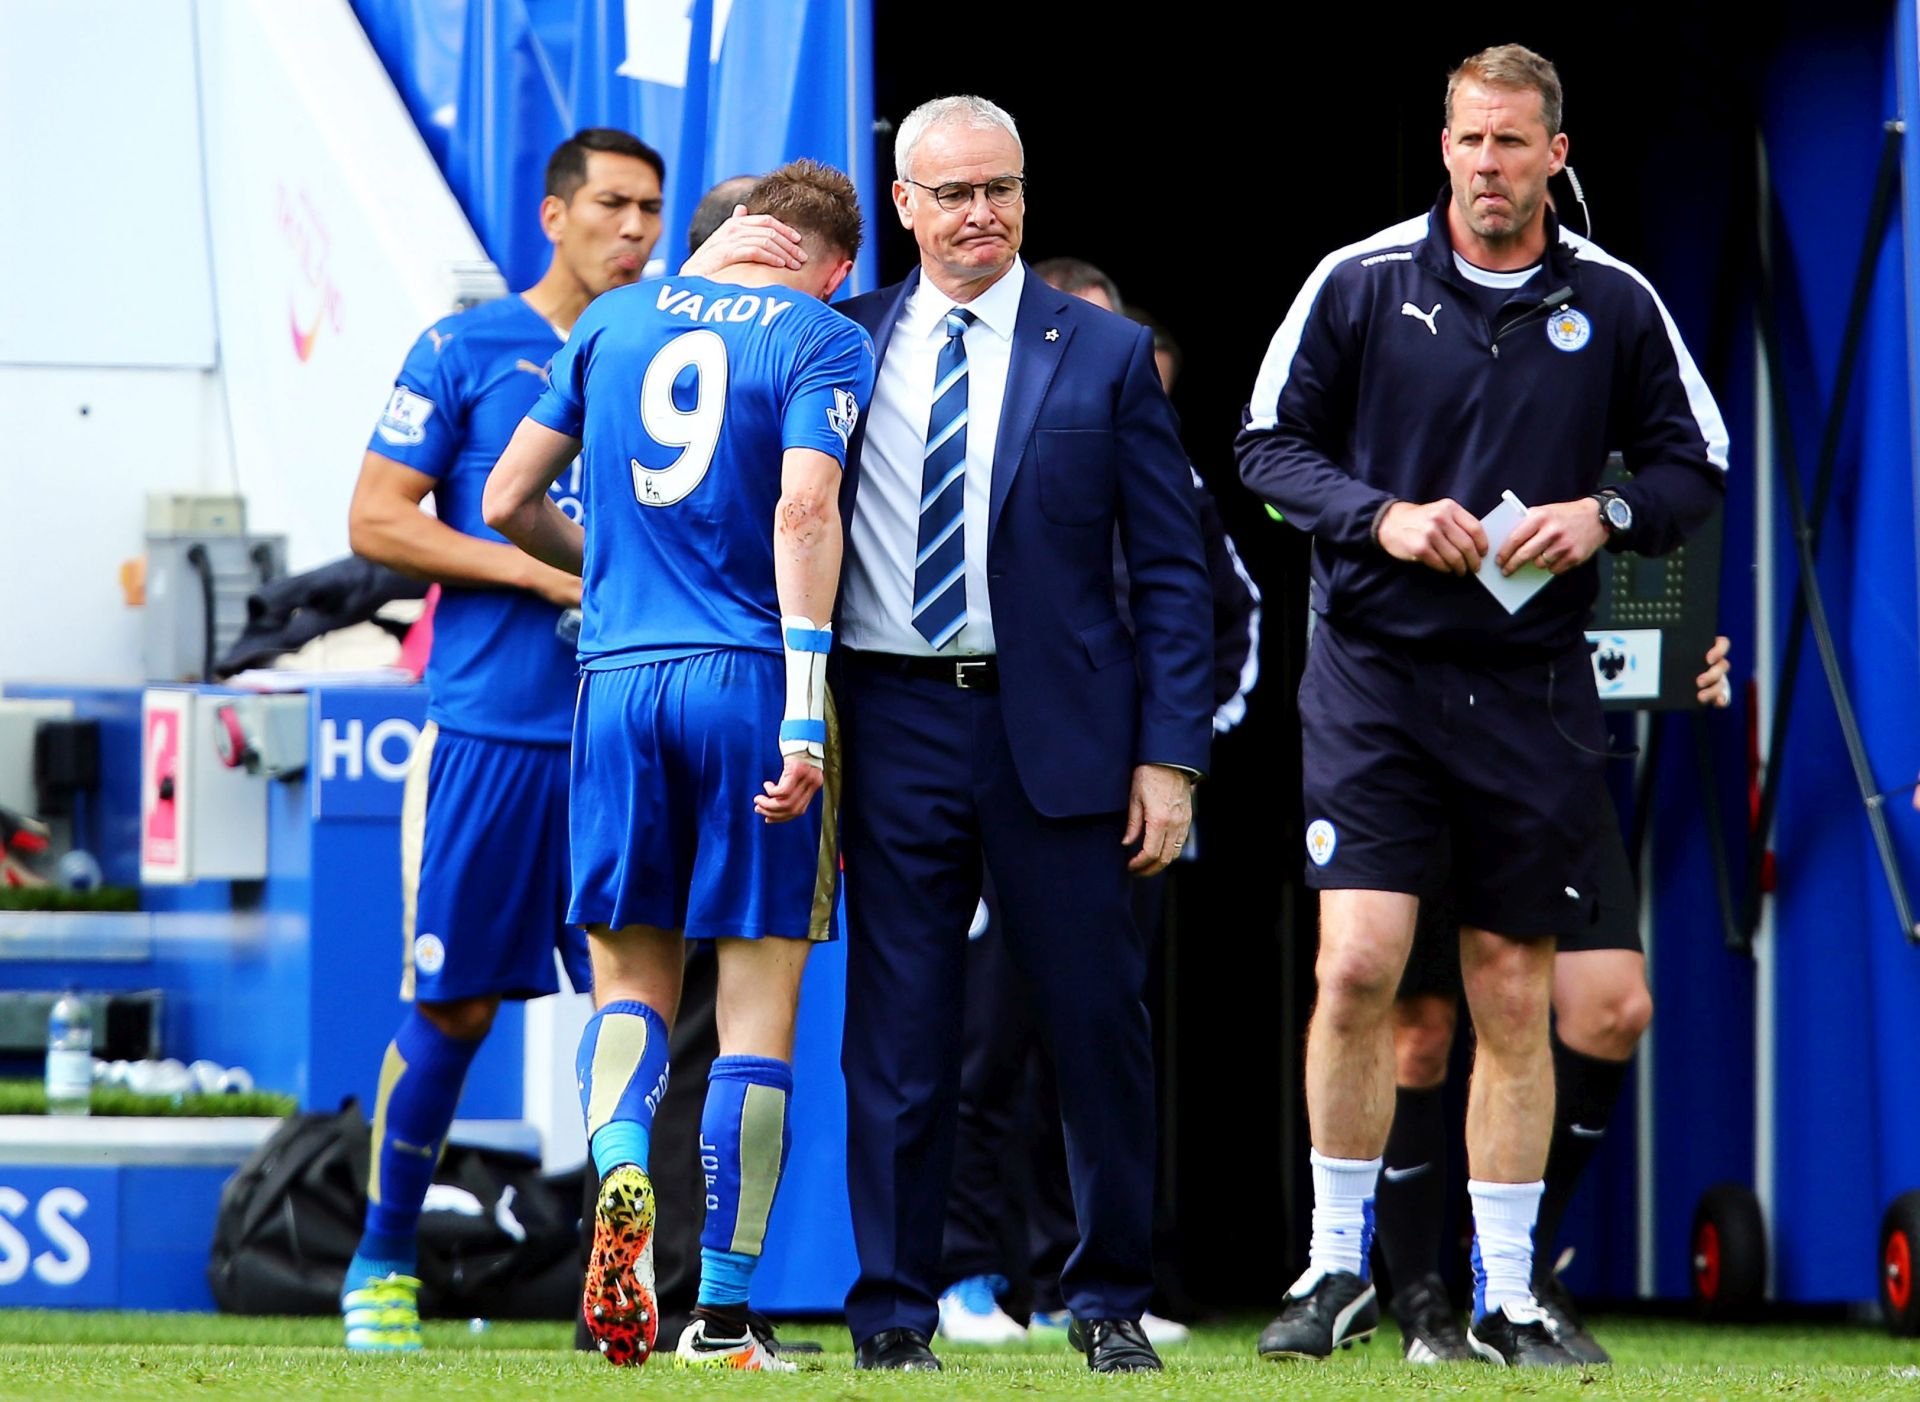 epa05263900 Leicester City's Jamie Vardy (2-L) is comforted by Leicester's manager Claudio Ranieri (C) after being sent off during the English Premier League soccer match between Leicester City and West Ham United at The King Power Stadium in Leicester, Britain, 17 April 2016.  EPA/TIM KEETON EDITORIAL USE ONLY. No use with unauthorized audio, video, data, fixture lists, club/league logos or 'live' services. Online in-match use limited to 75 images, no video emulation. No use in betting, games or single club/league/player publications.